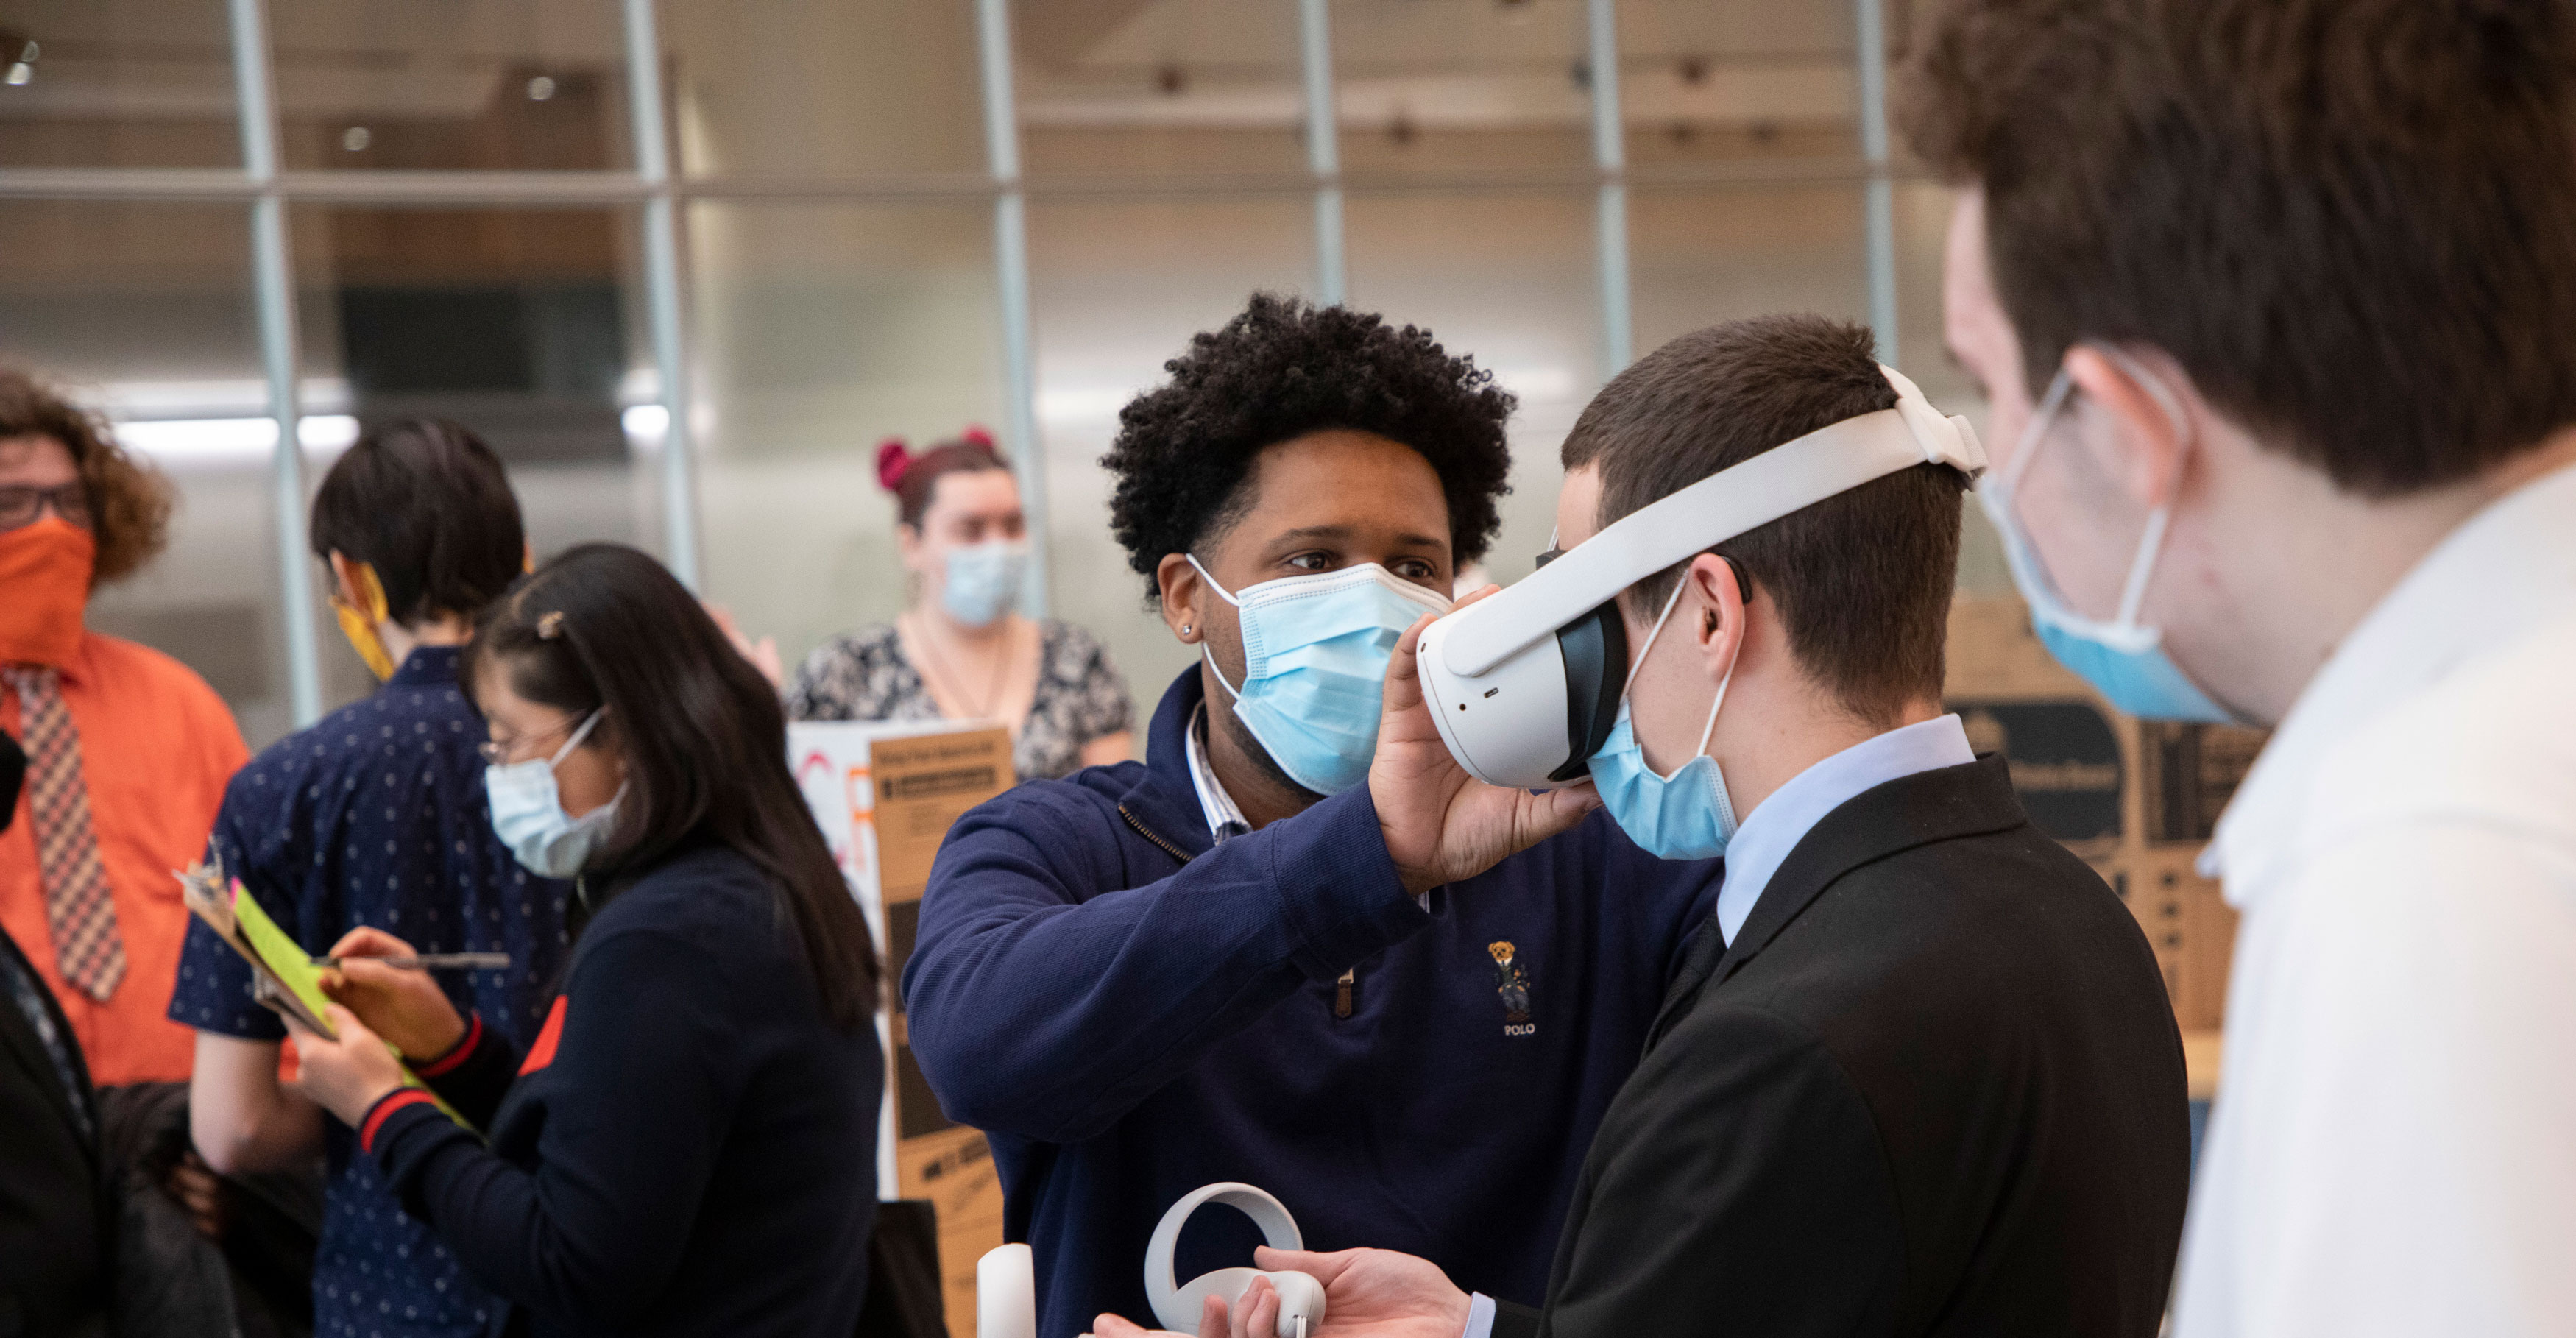 A student helps another person put on a virtual reality head seat during a poster session presentation.